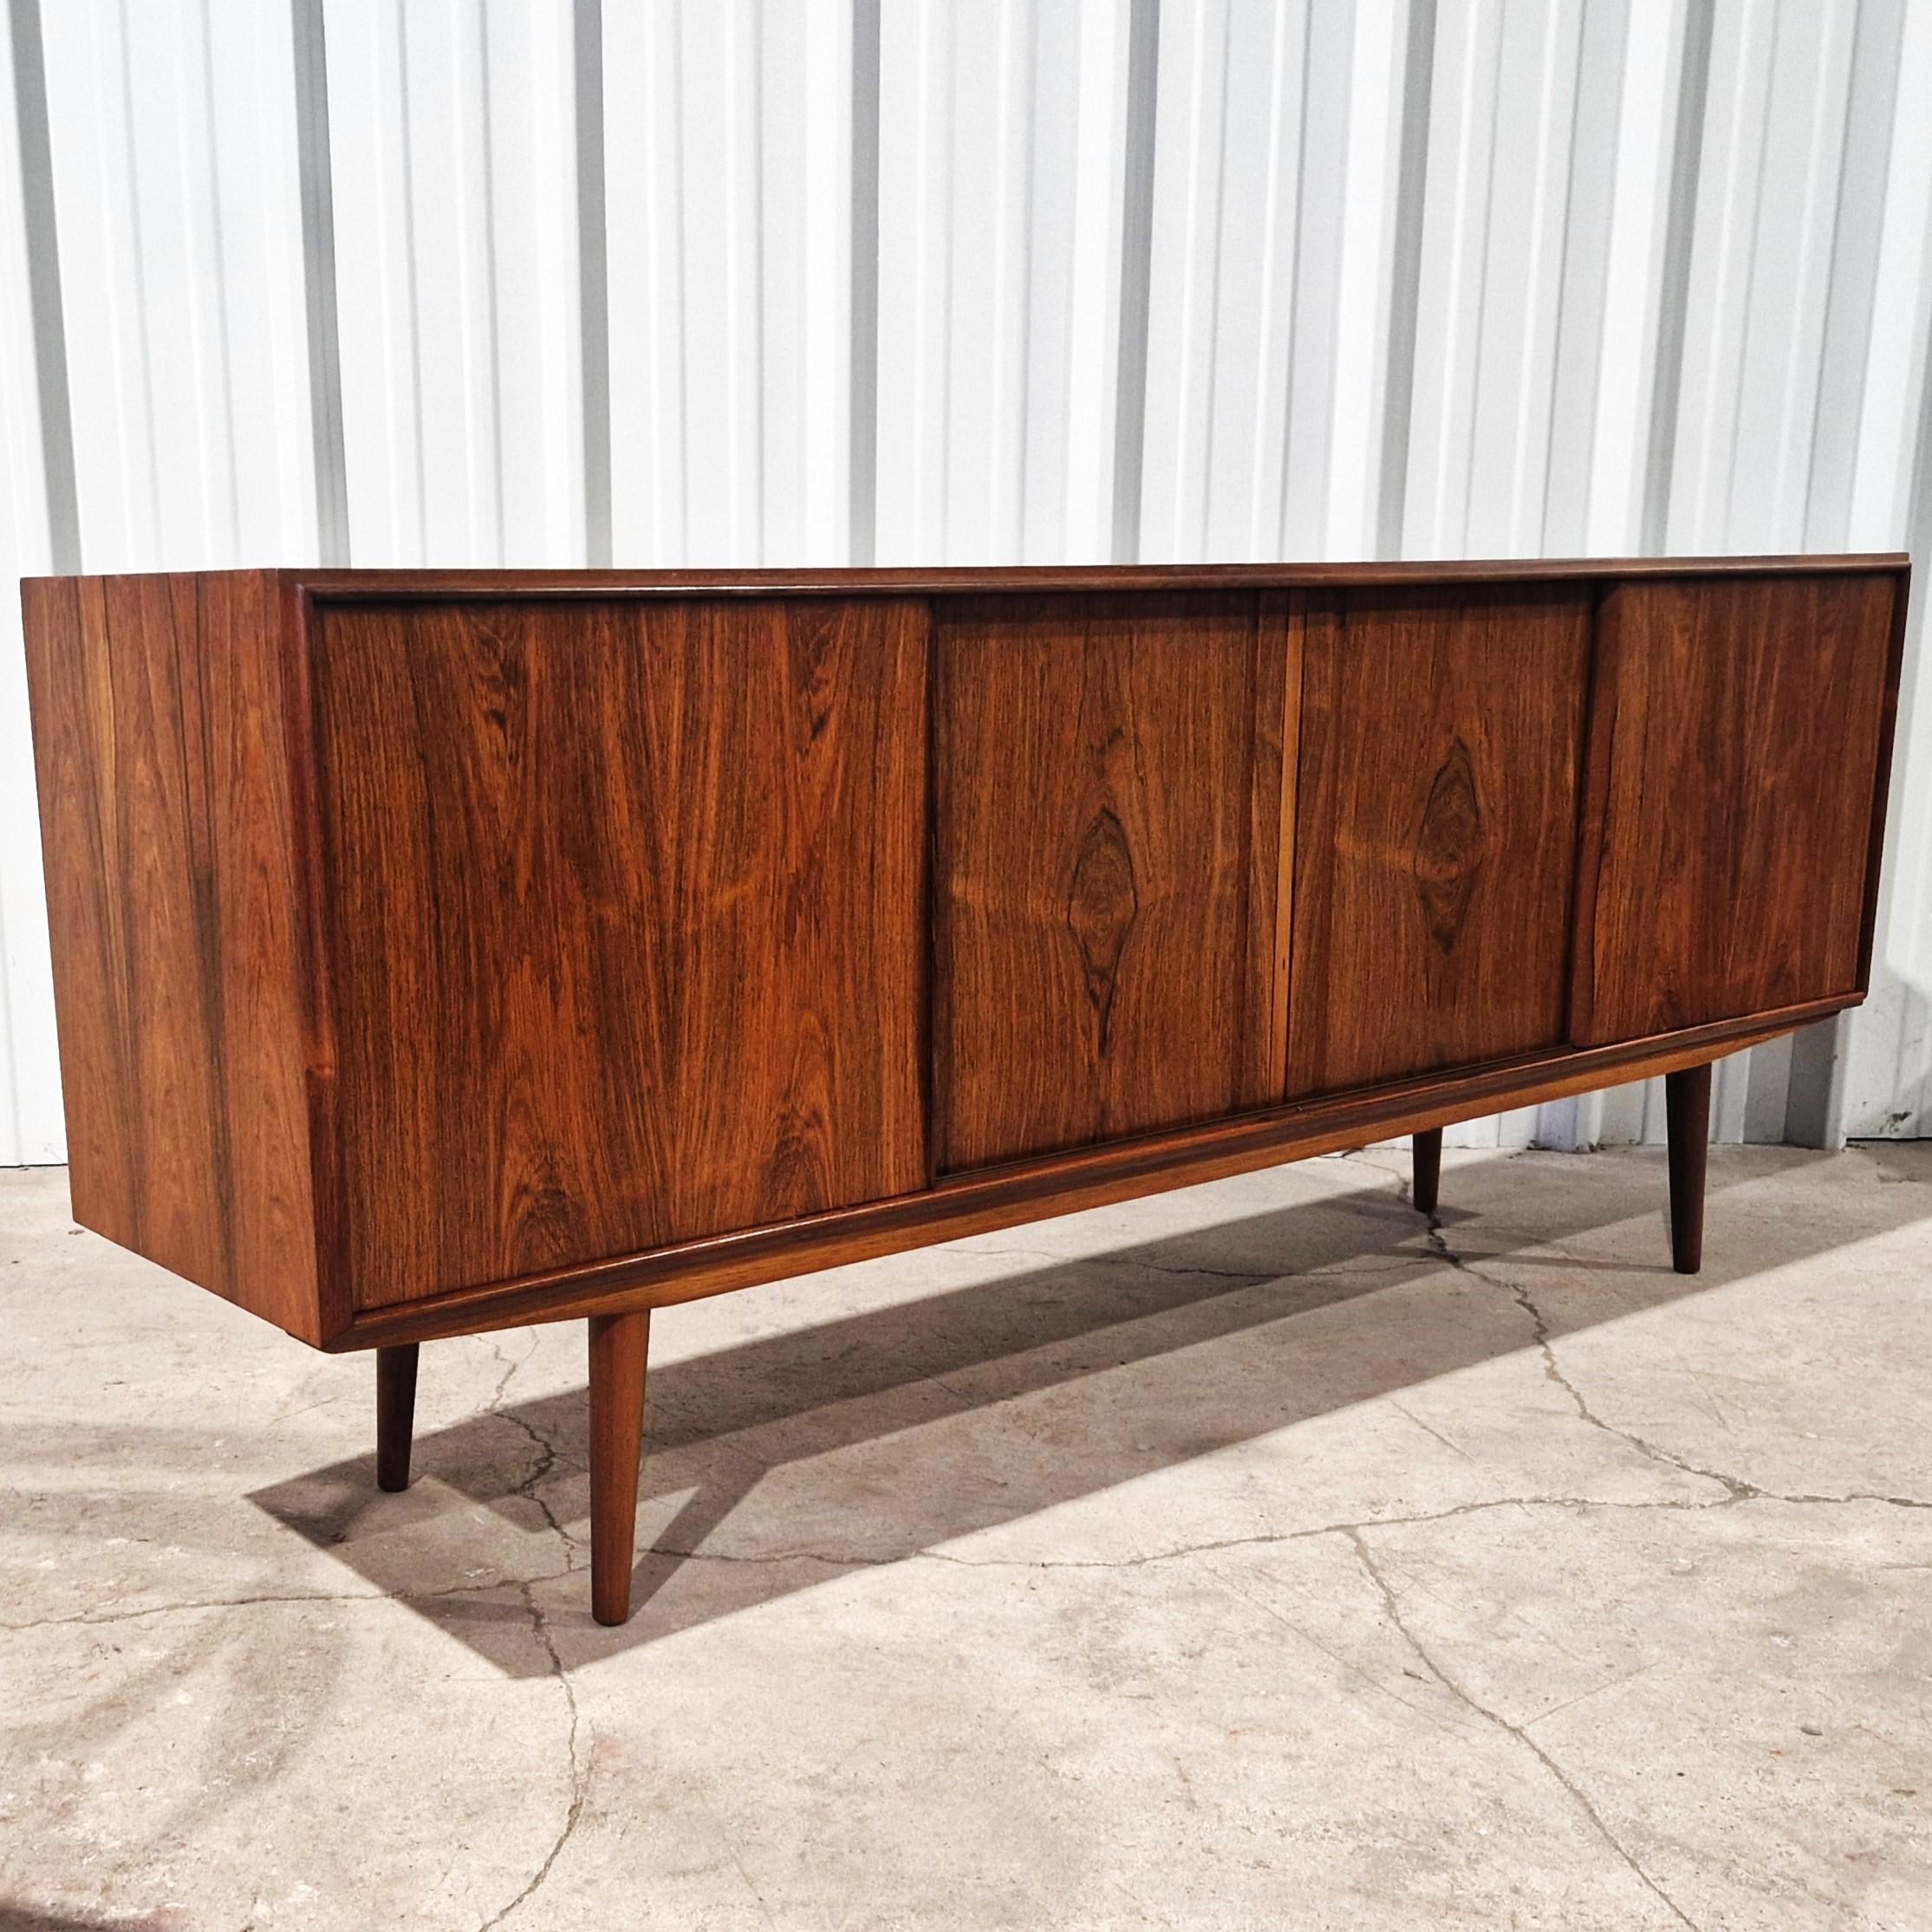 Elegant Scandinavian sideboard by E.W. Bach for Sejling Skabe publisher, Denmark, 1960s. This piece of furniture, set on compass legs, opens with 4 sliding doors revealing ample storage space. Very good condition, with very slight signs of use.